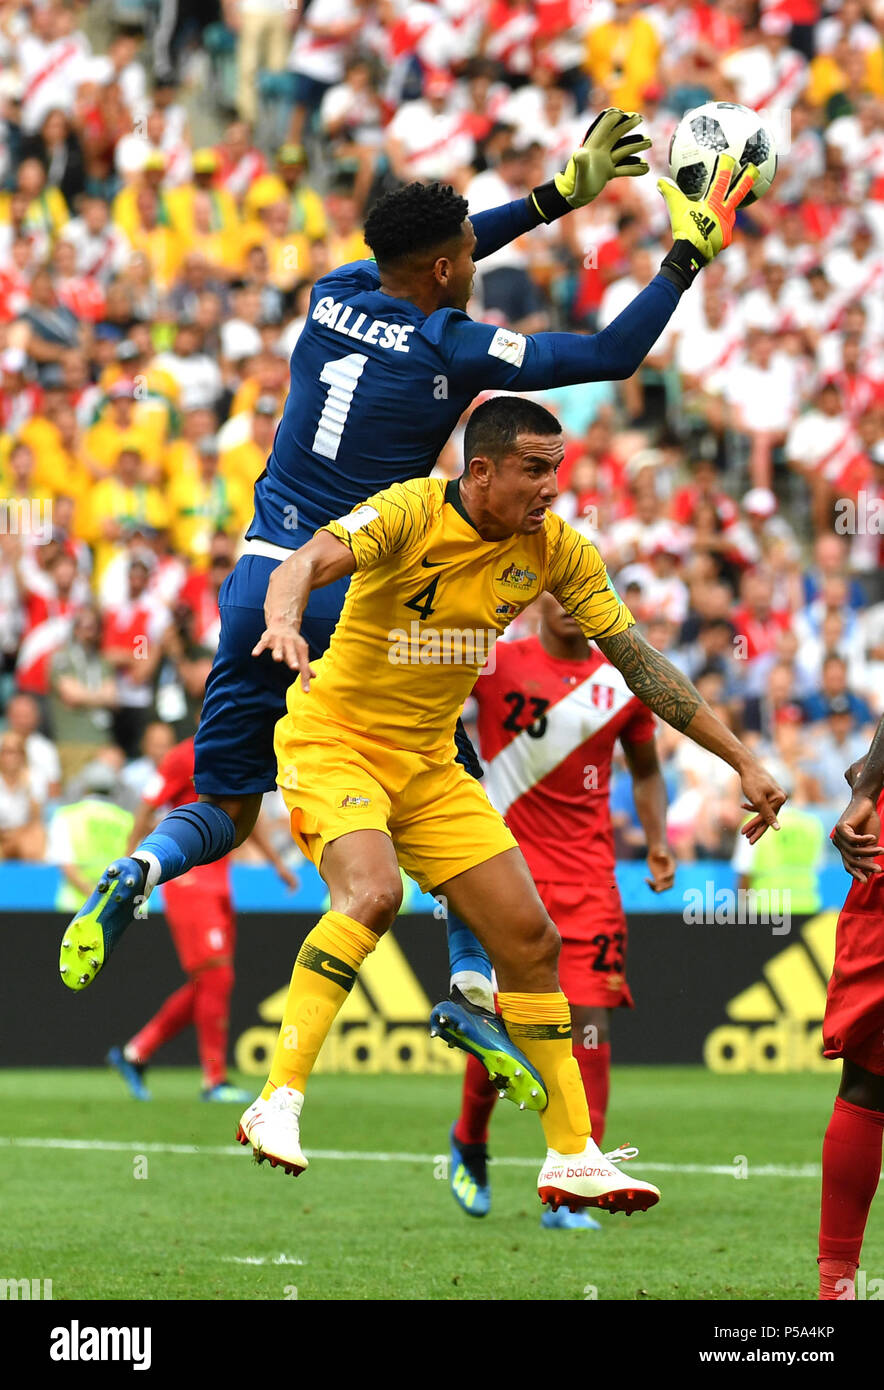 Sochi, Russia. 26th June, 2018. Tim Cahill (bottom) of Australia vies with goalkeeper Pedro Gallese of Peru during the 2018 FIFA World Cup Group C match between Australia and Peru in Sochi, Russia, June 26, 2018. Peru won 2-0. Credit: Chen Cheng/Xinhua/Alamy Live News Stock Photo